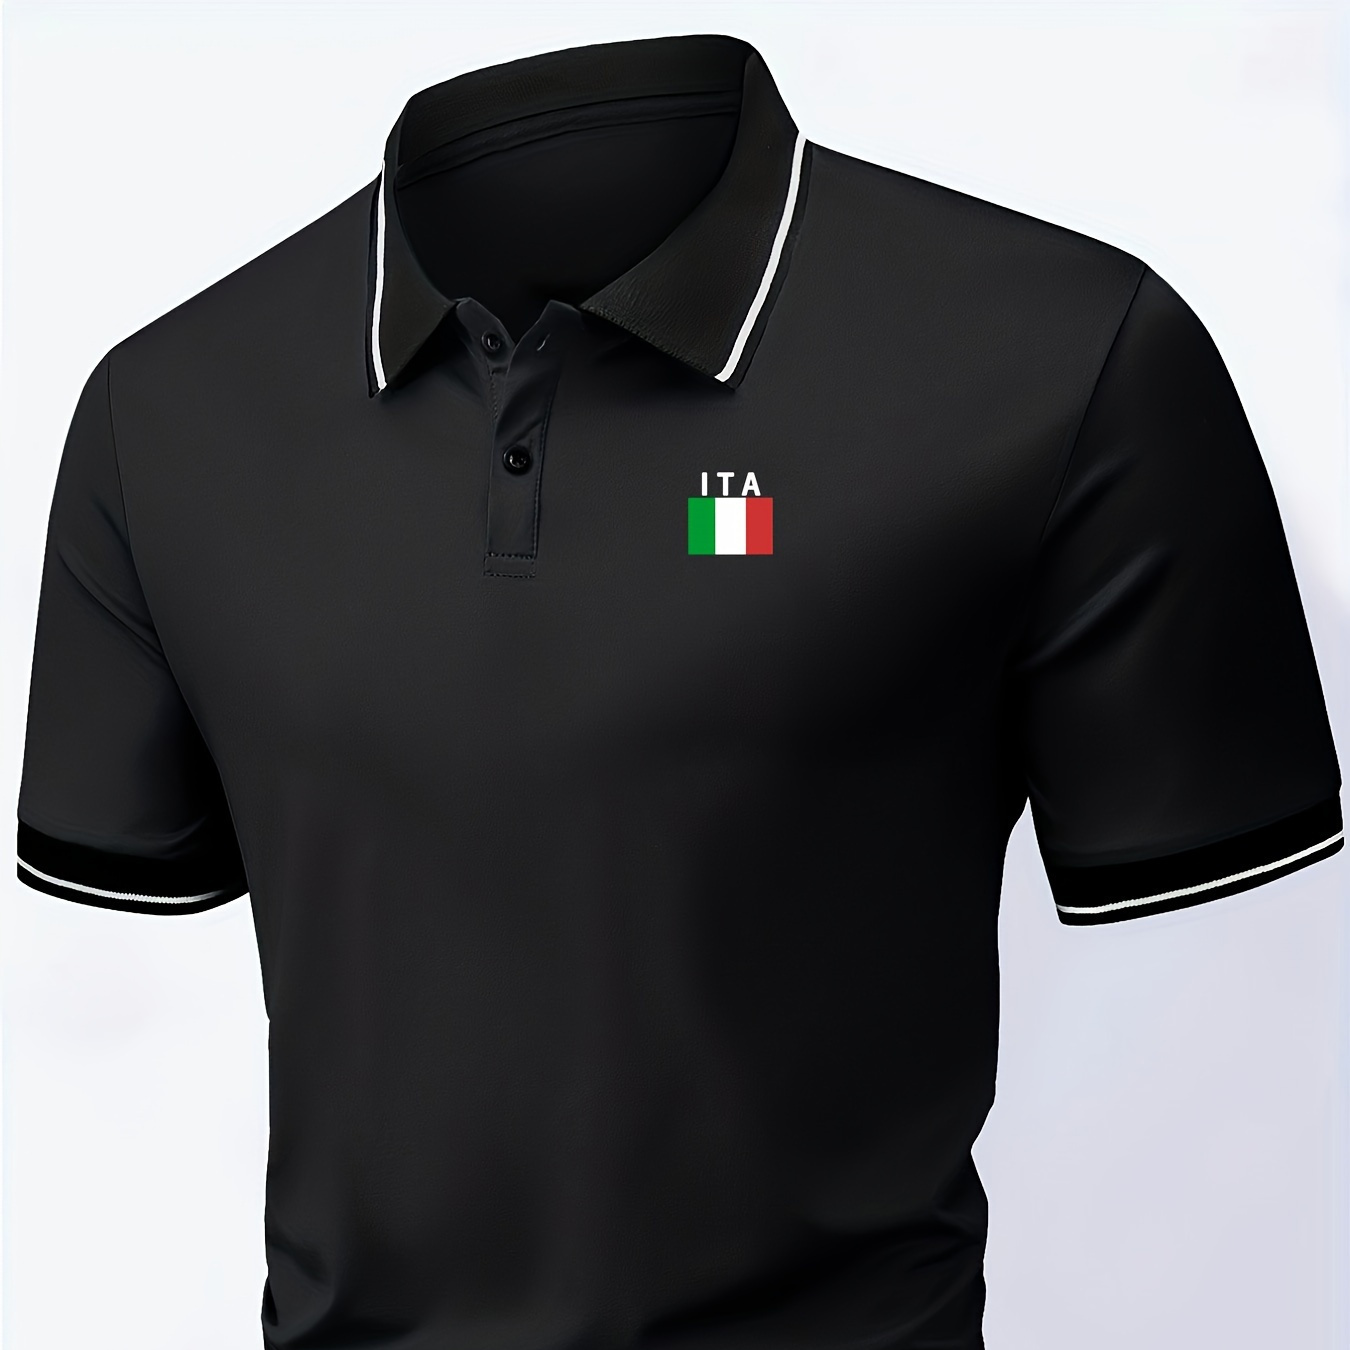 

Ita Print Summer Men's Fashionable Lapel Short Sleeve Golf T-shirt, Suitable For Commercial Entertainment Occasions, Such As Tennis And Golf, Men's Clothing, As Gifts